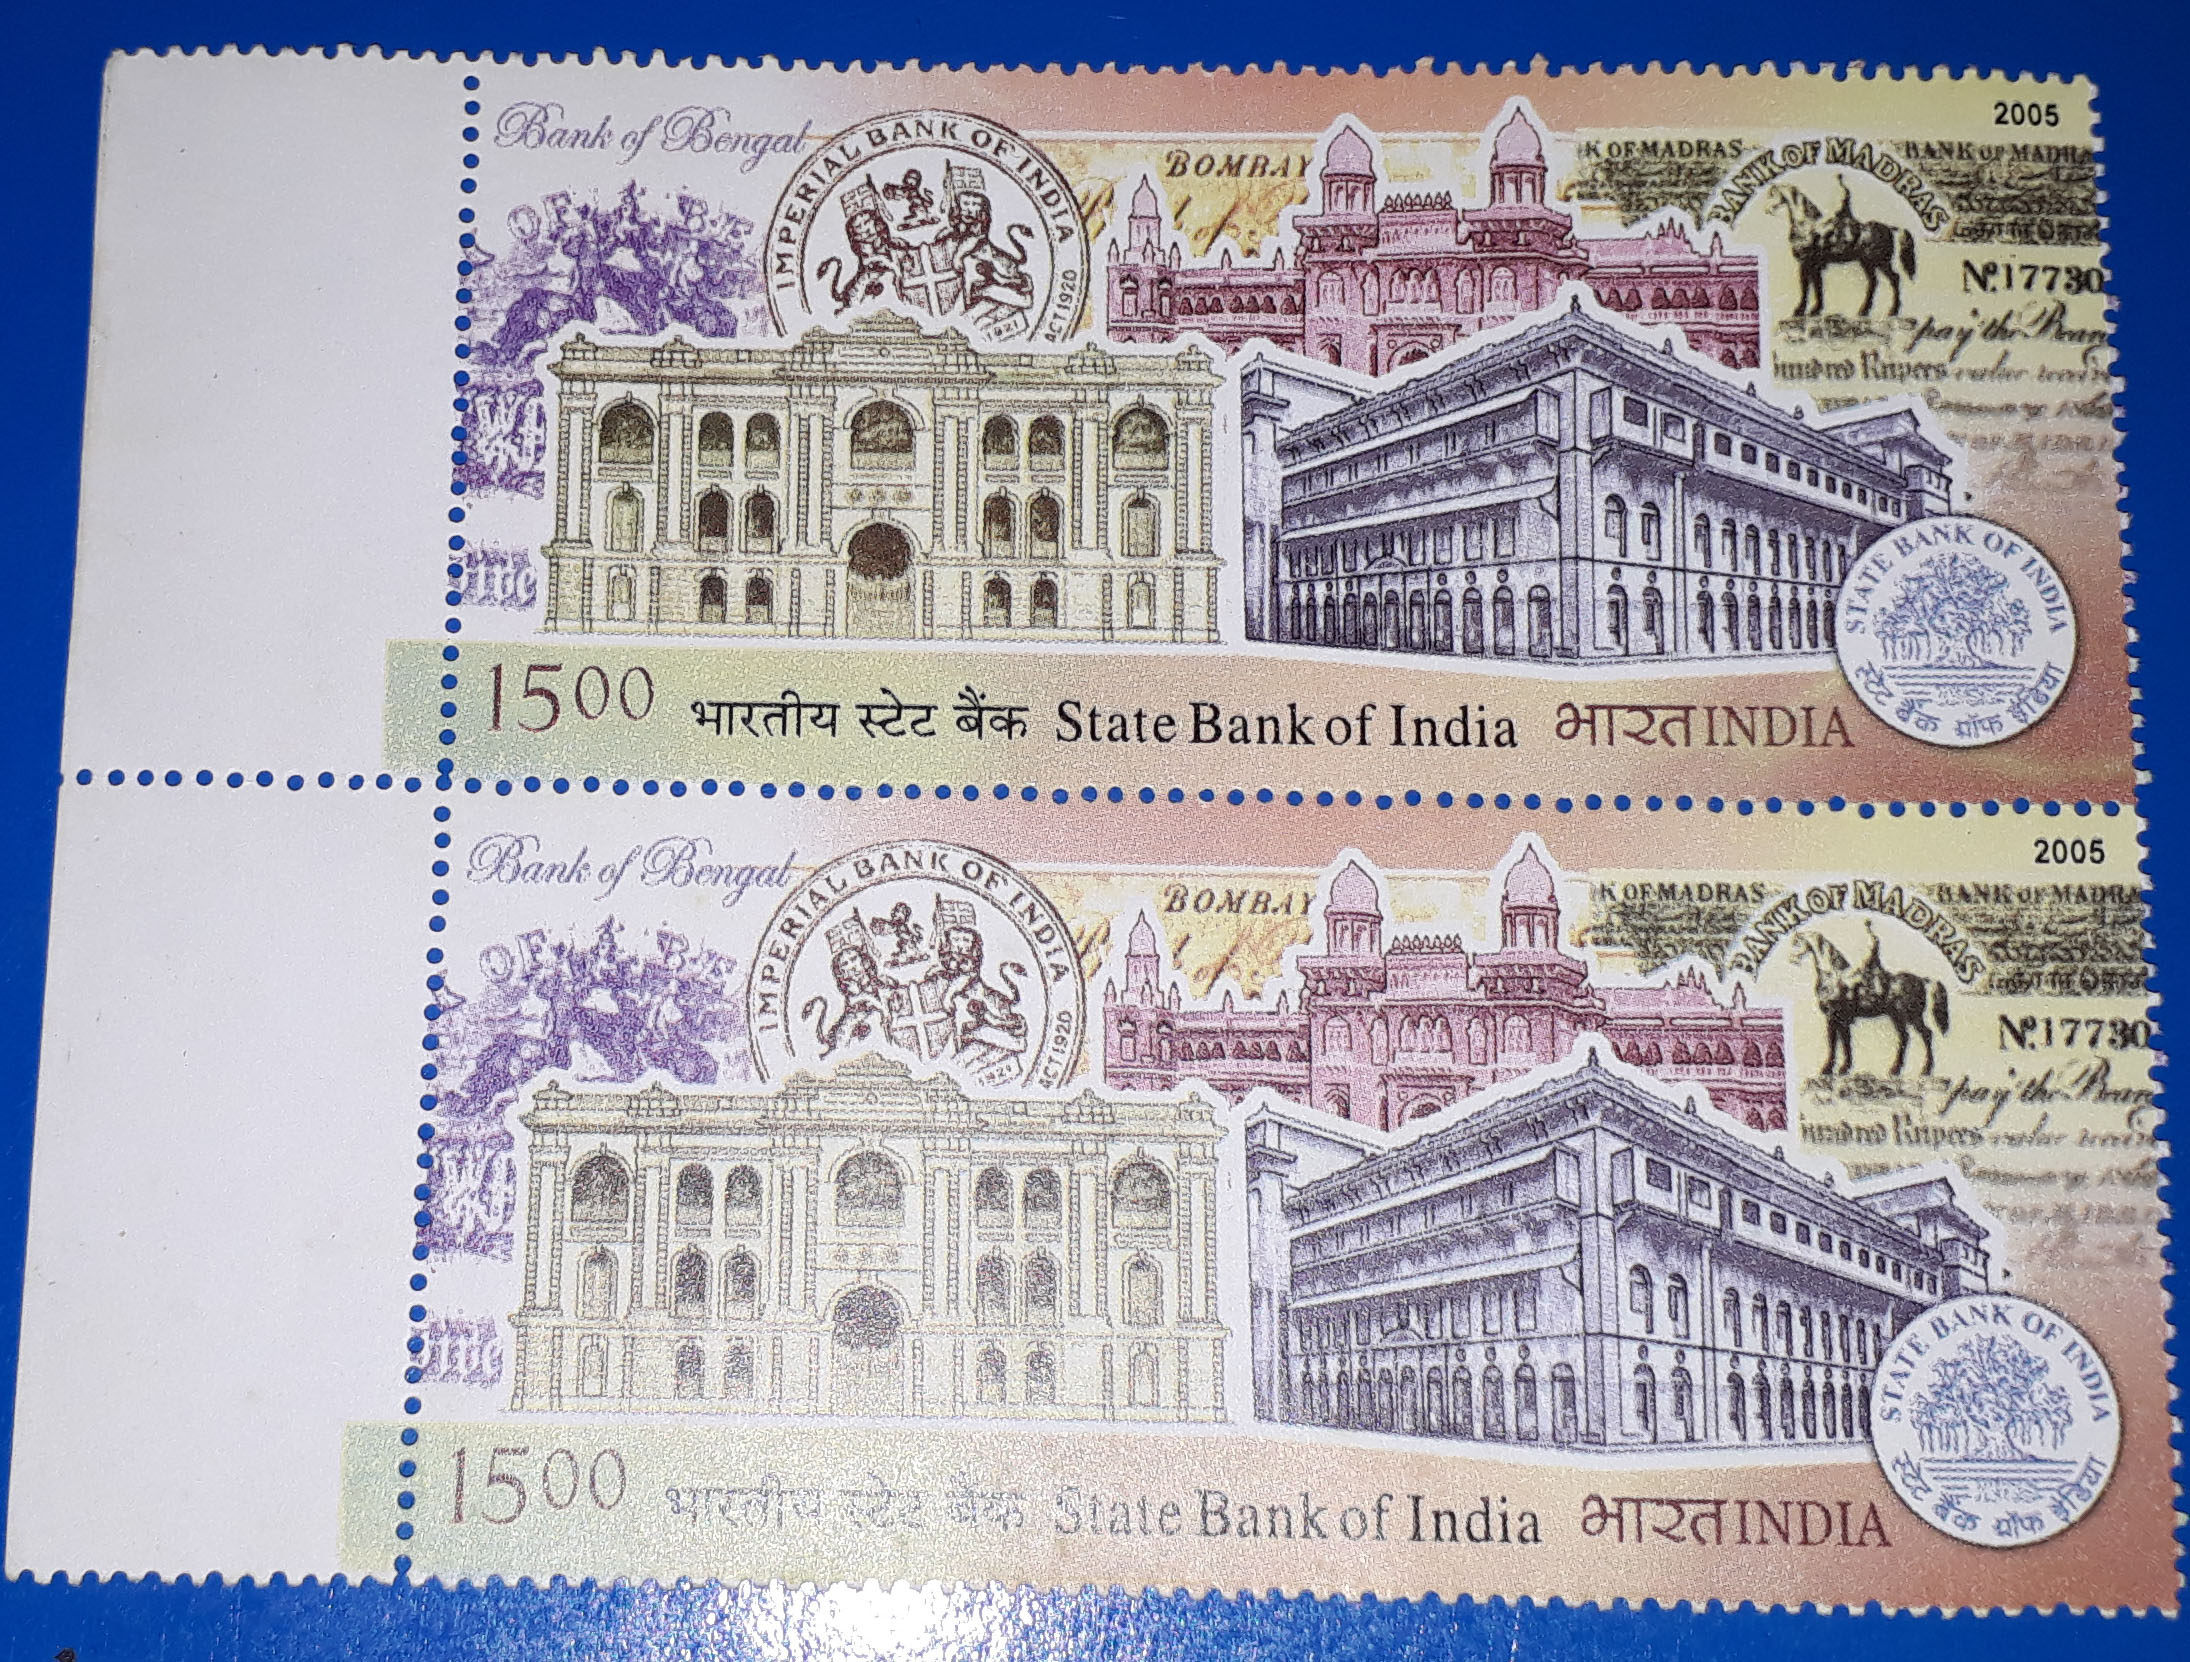 Block Of 2 India Stamp 2005 State Bank Of India Sbi Mint Stamps Pk Stampwala 9167